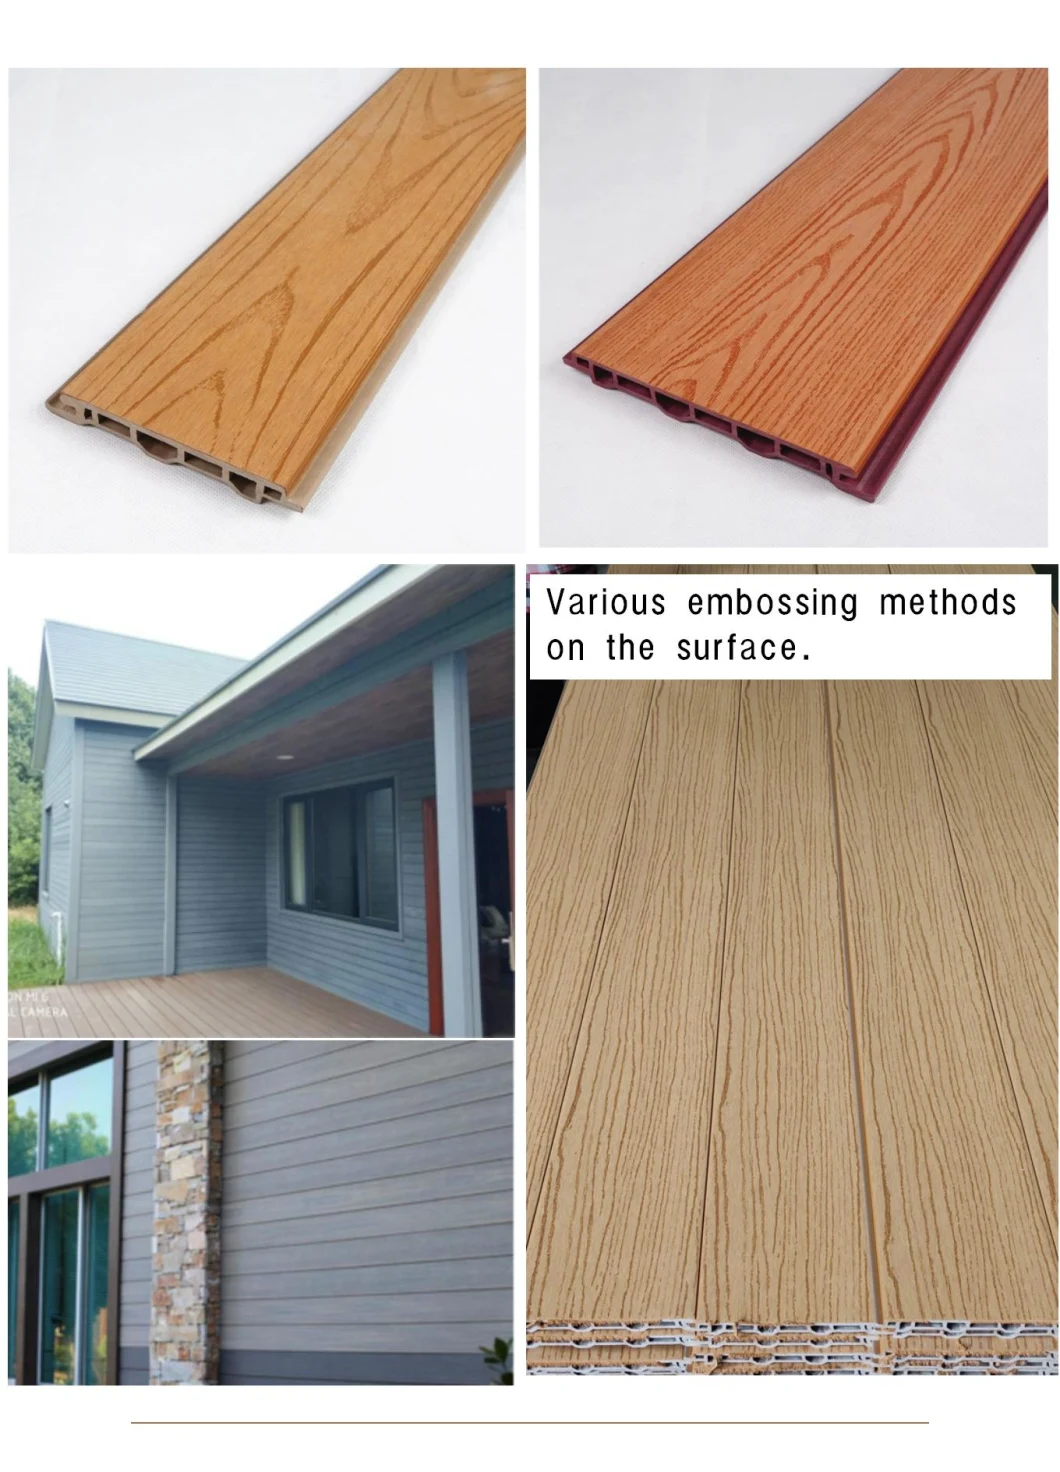 Mould Resistant Conventional WPC Wood Composite DIY Tile for Balcony Outdoor Space Decoration